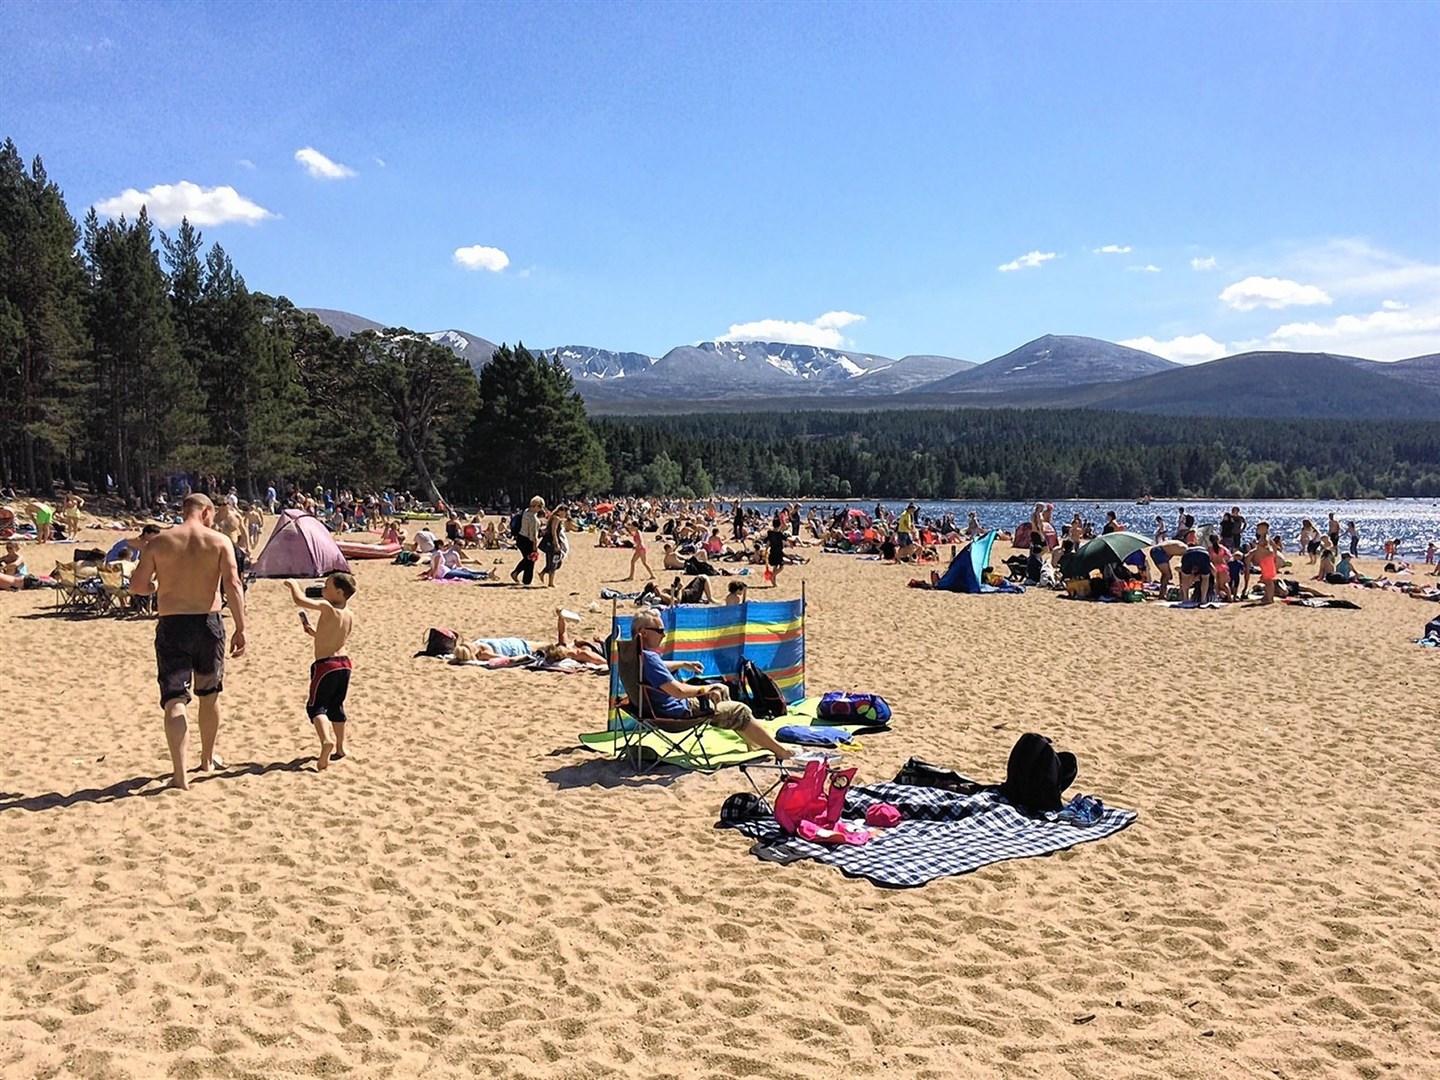 Loch Morlich beach is a very popular attraction in the good weather.